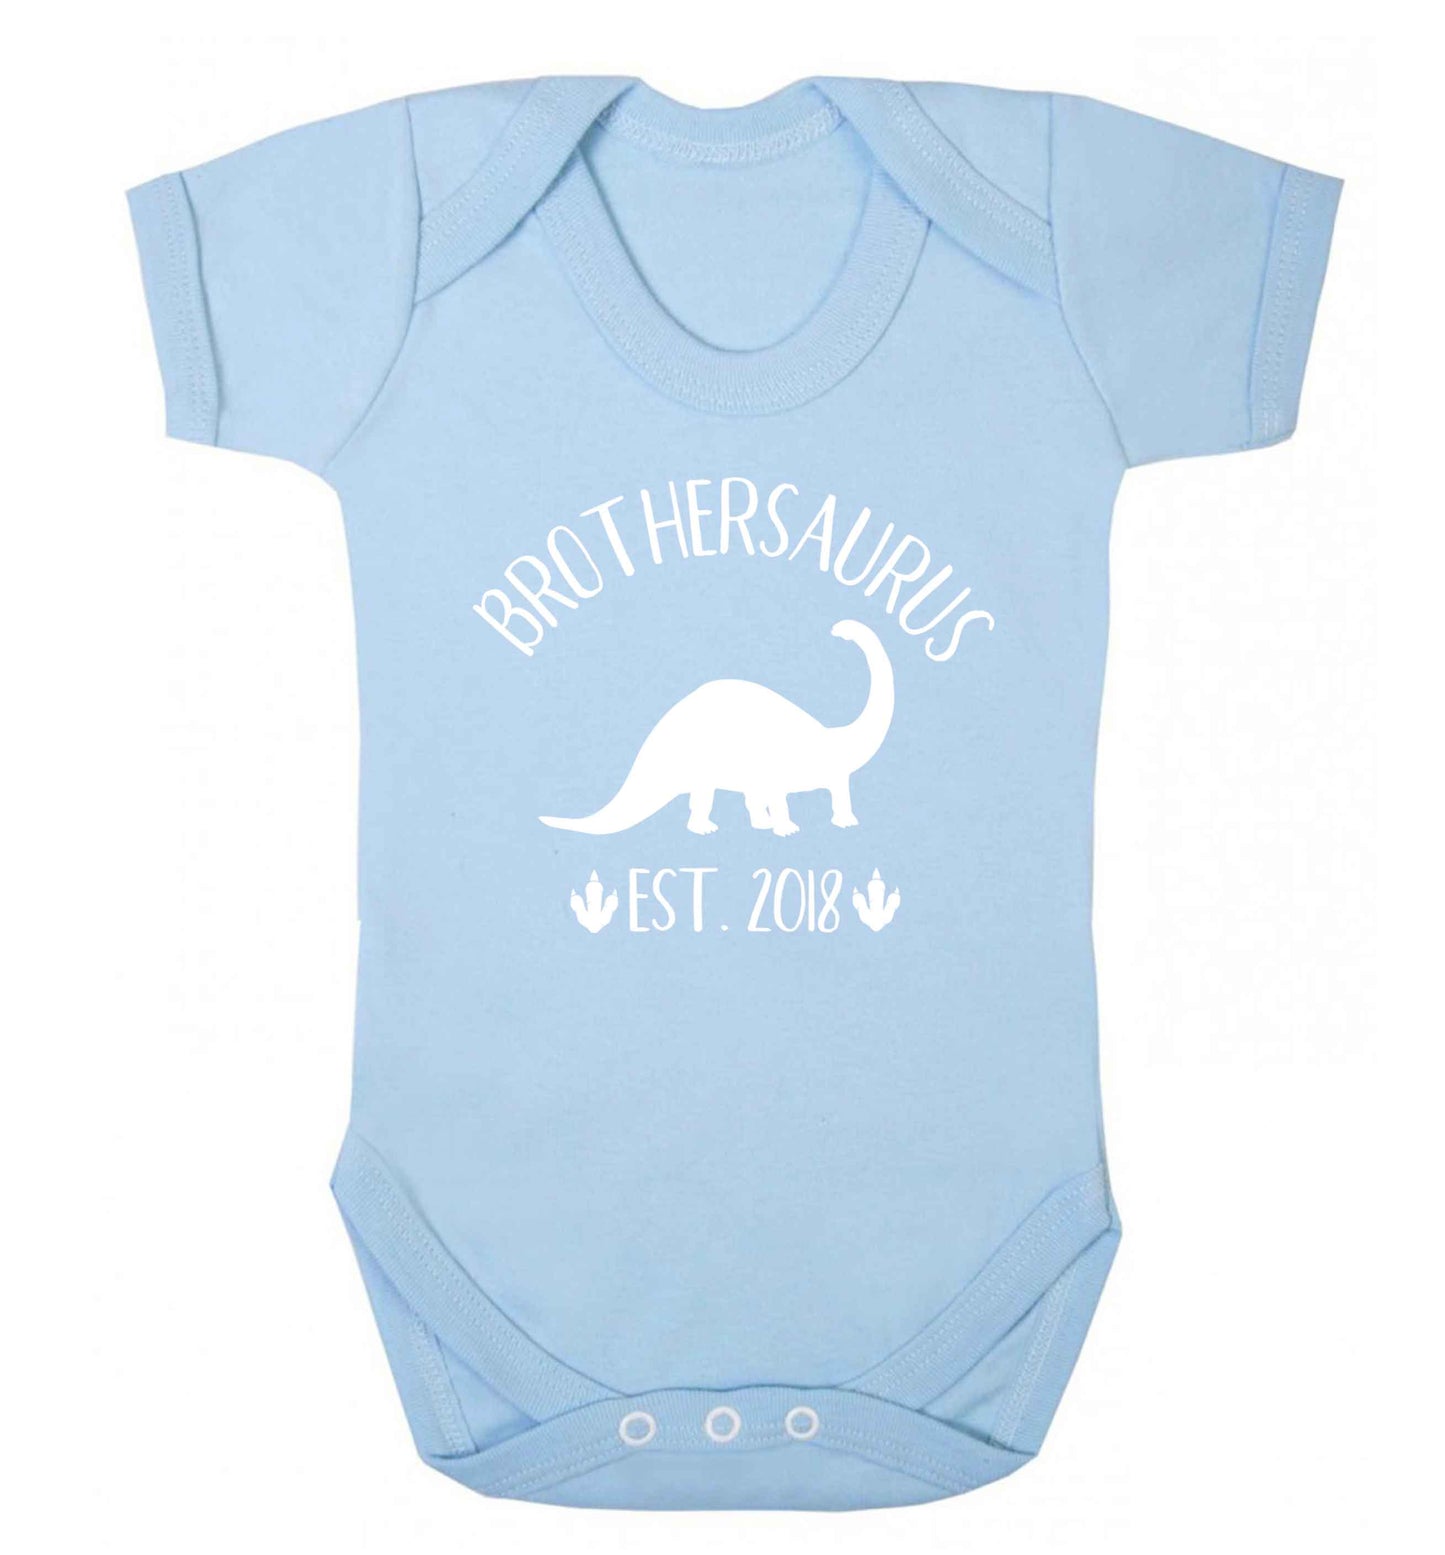 Personalised brothersaurus since (custom date) Baby Vest pale blue 18-24 months